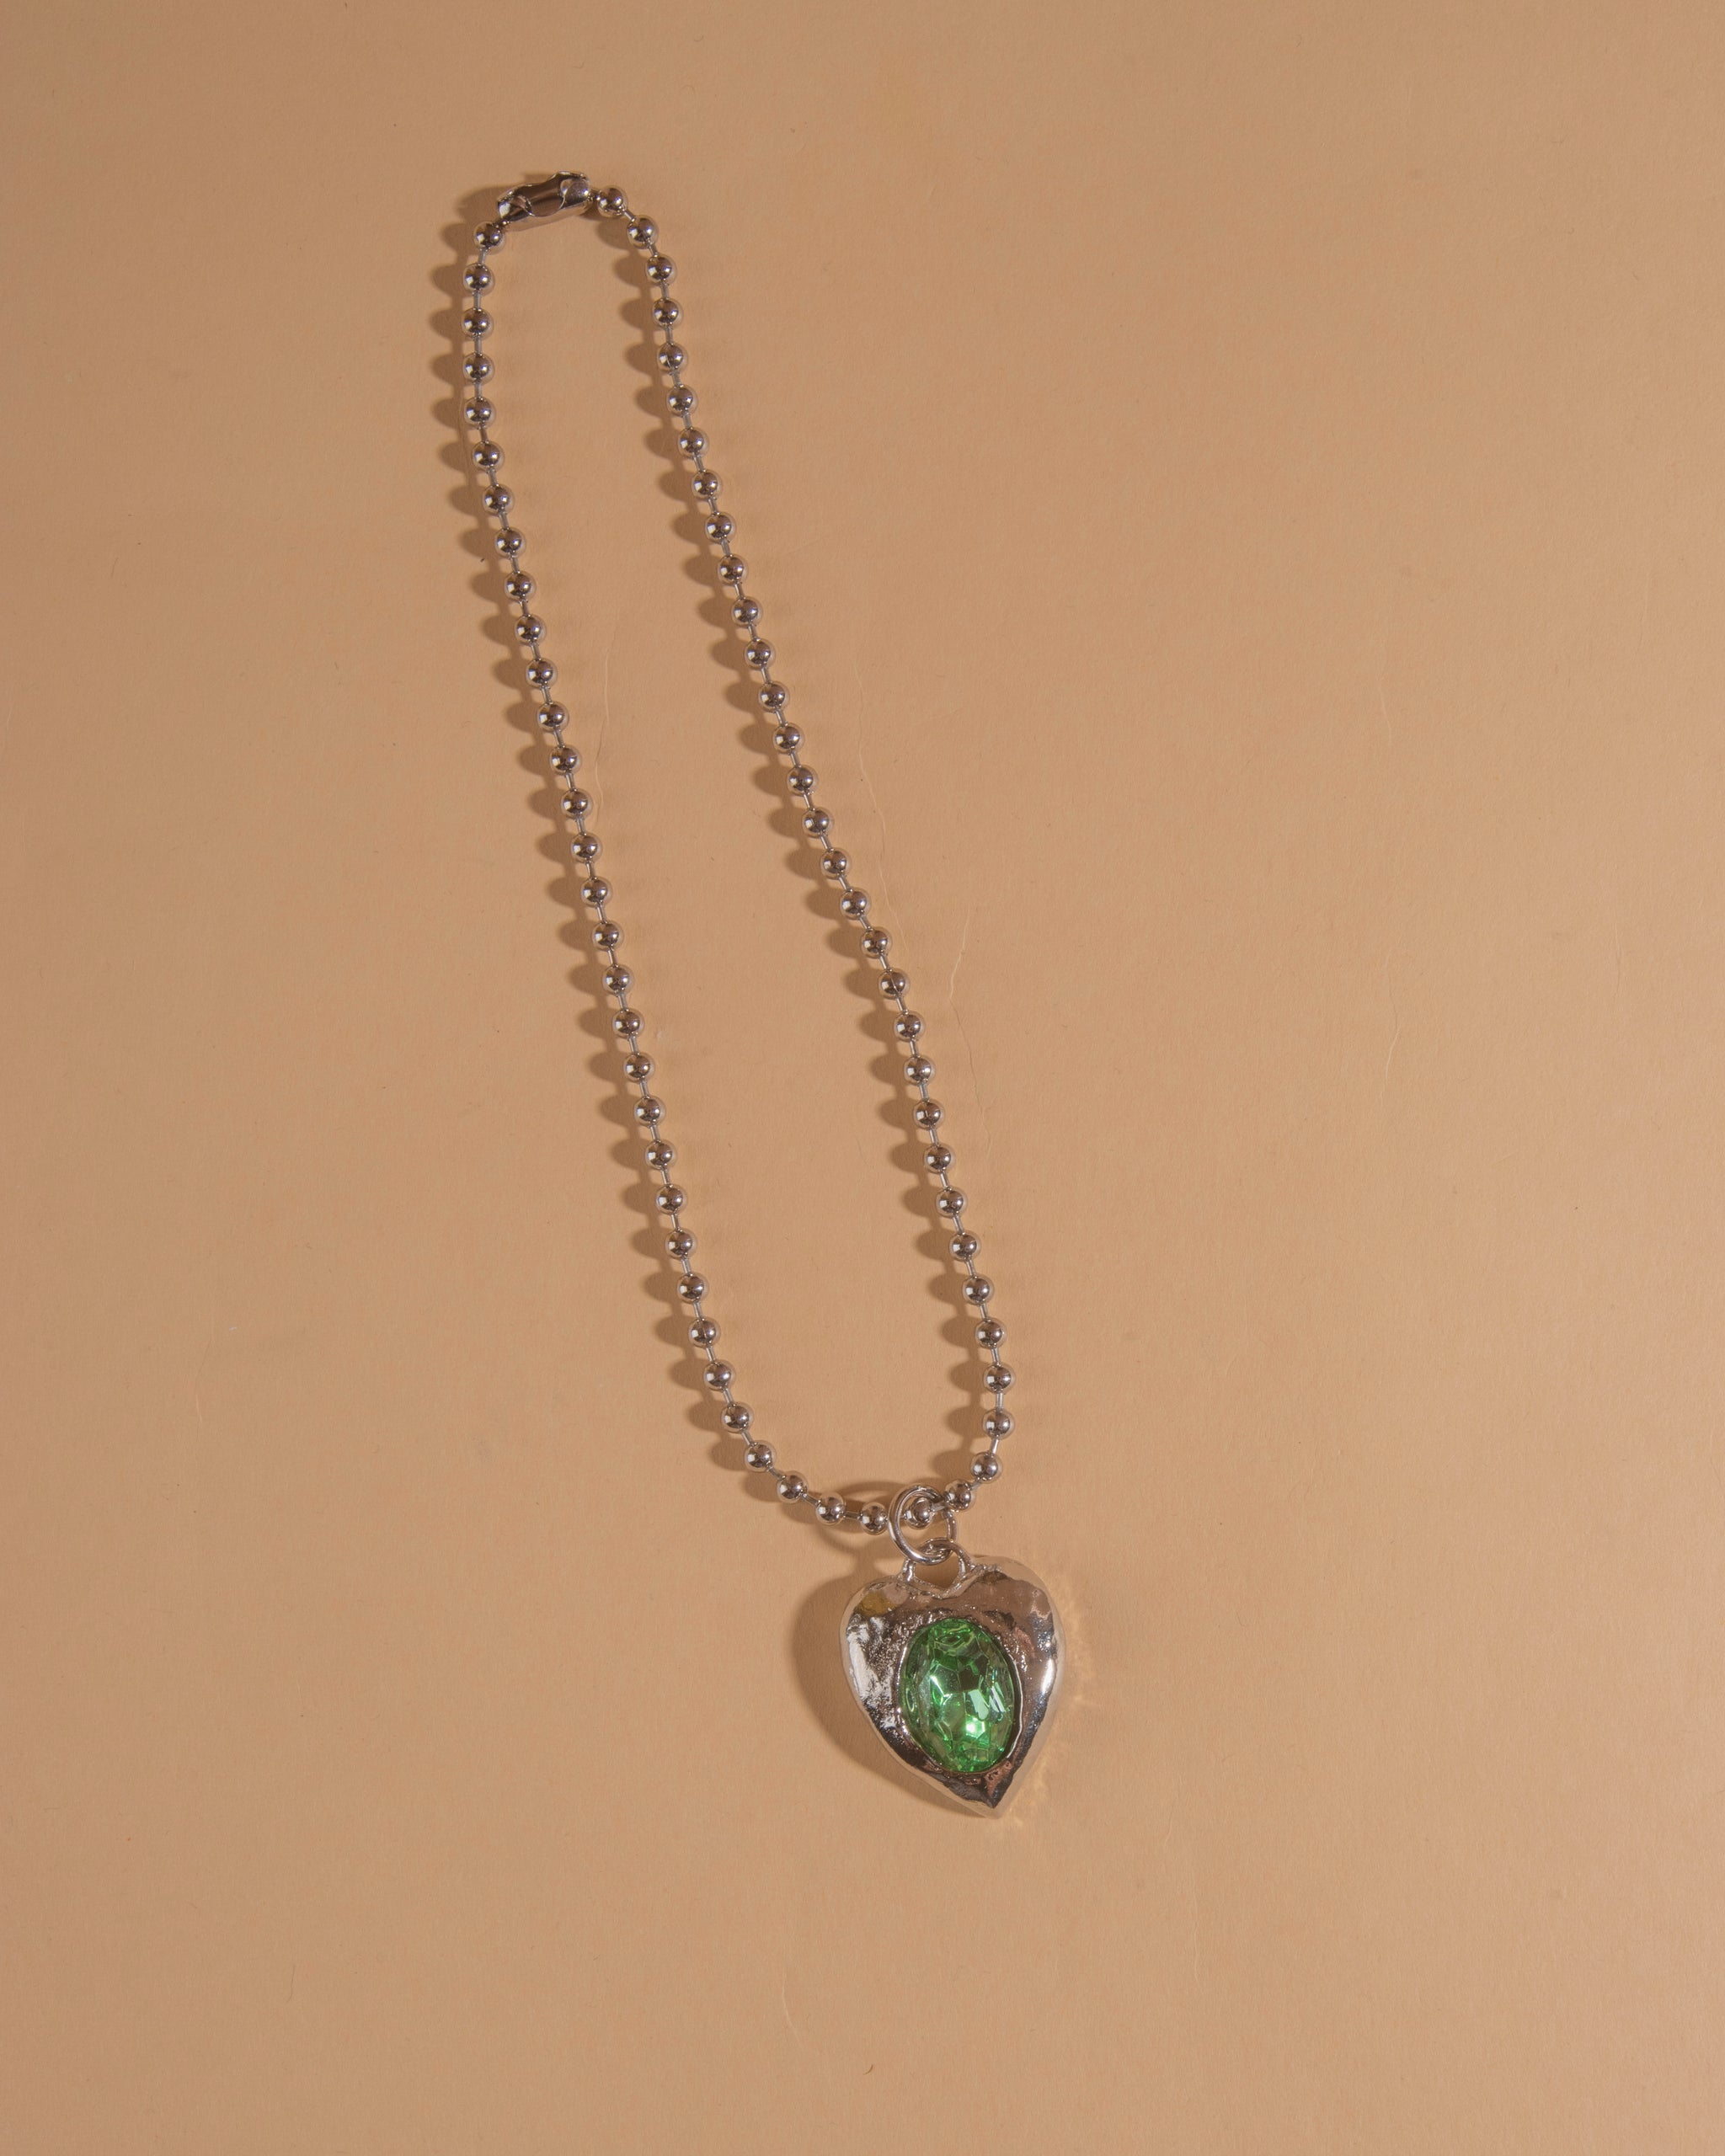 Silver-tone heart necklace set with clear glass stone on ball chain.